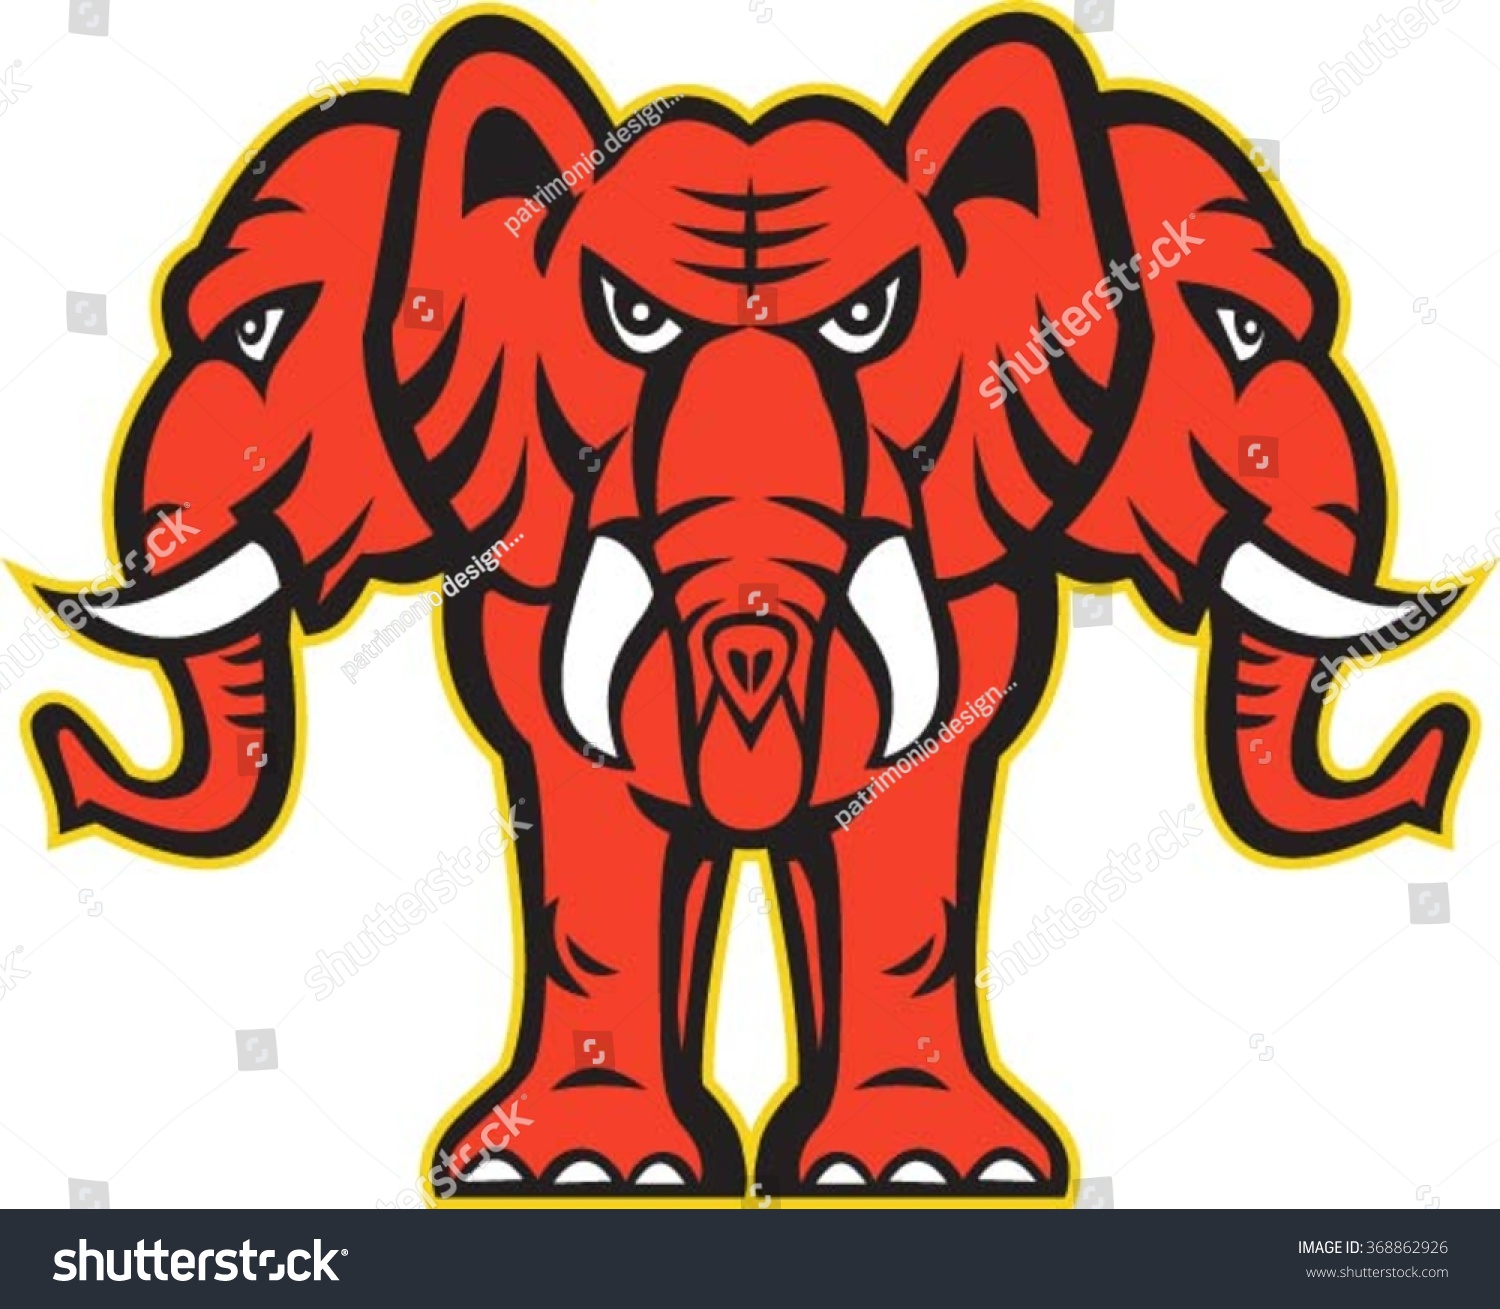 SVG of Illustration of a three headed elephant standing set on isolated white background done in retro style.  svg